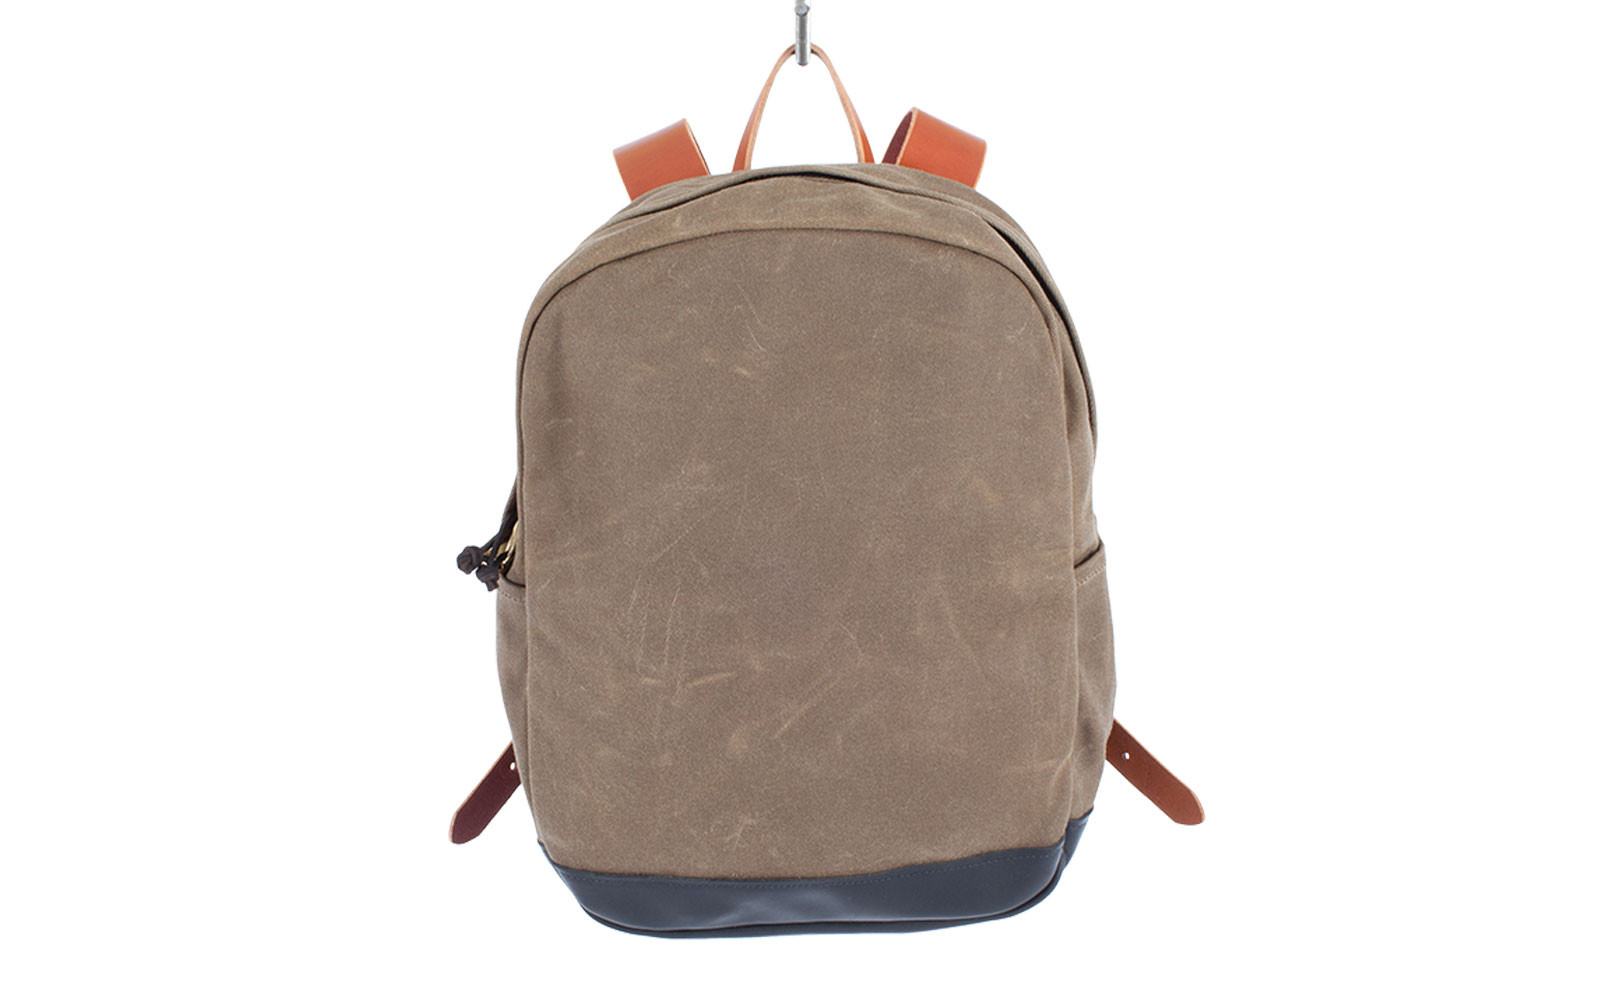 Saddle-tan-waxed-canvas-zip-backpack-back-pack-made-in-the-usa-joshuvela-front.jpg